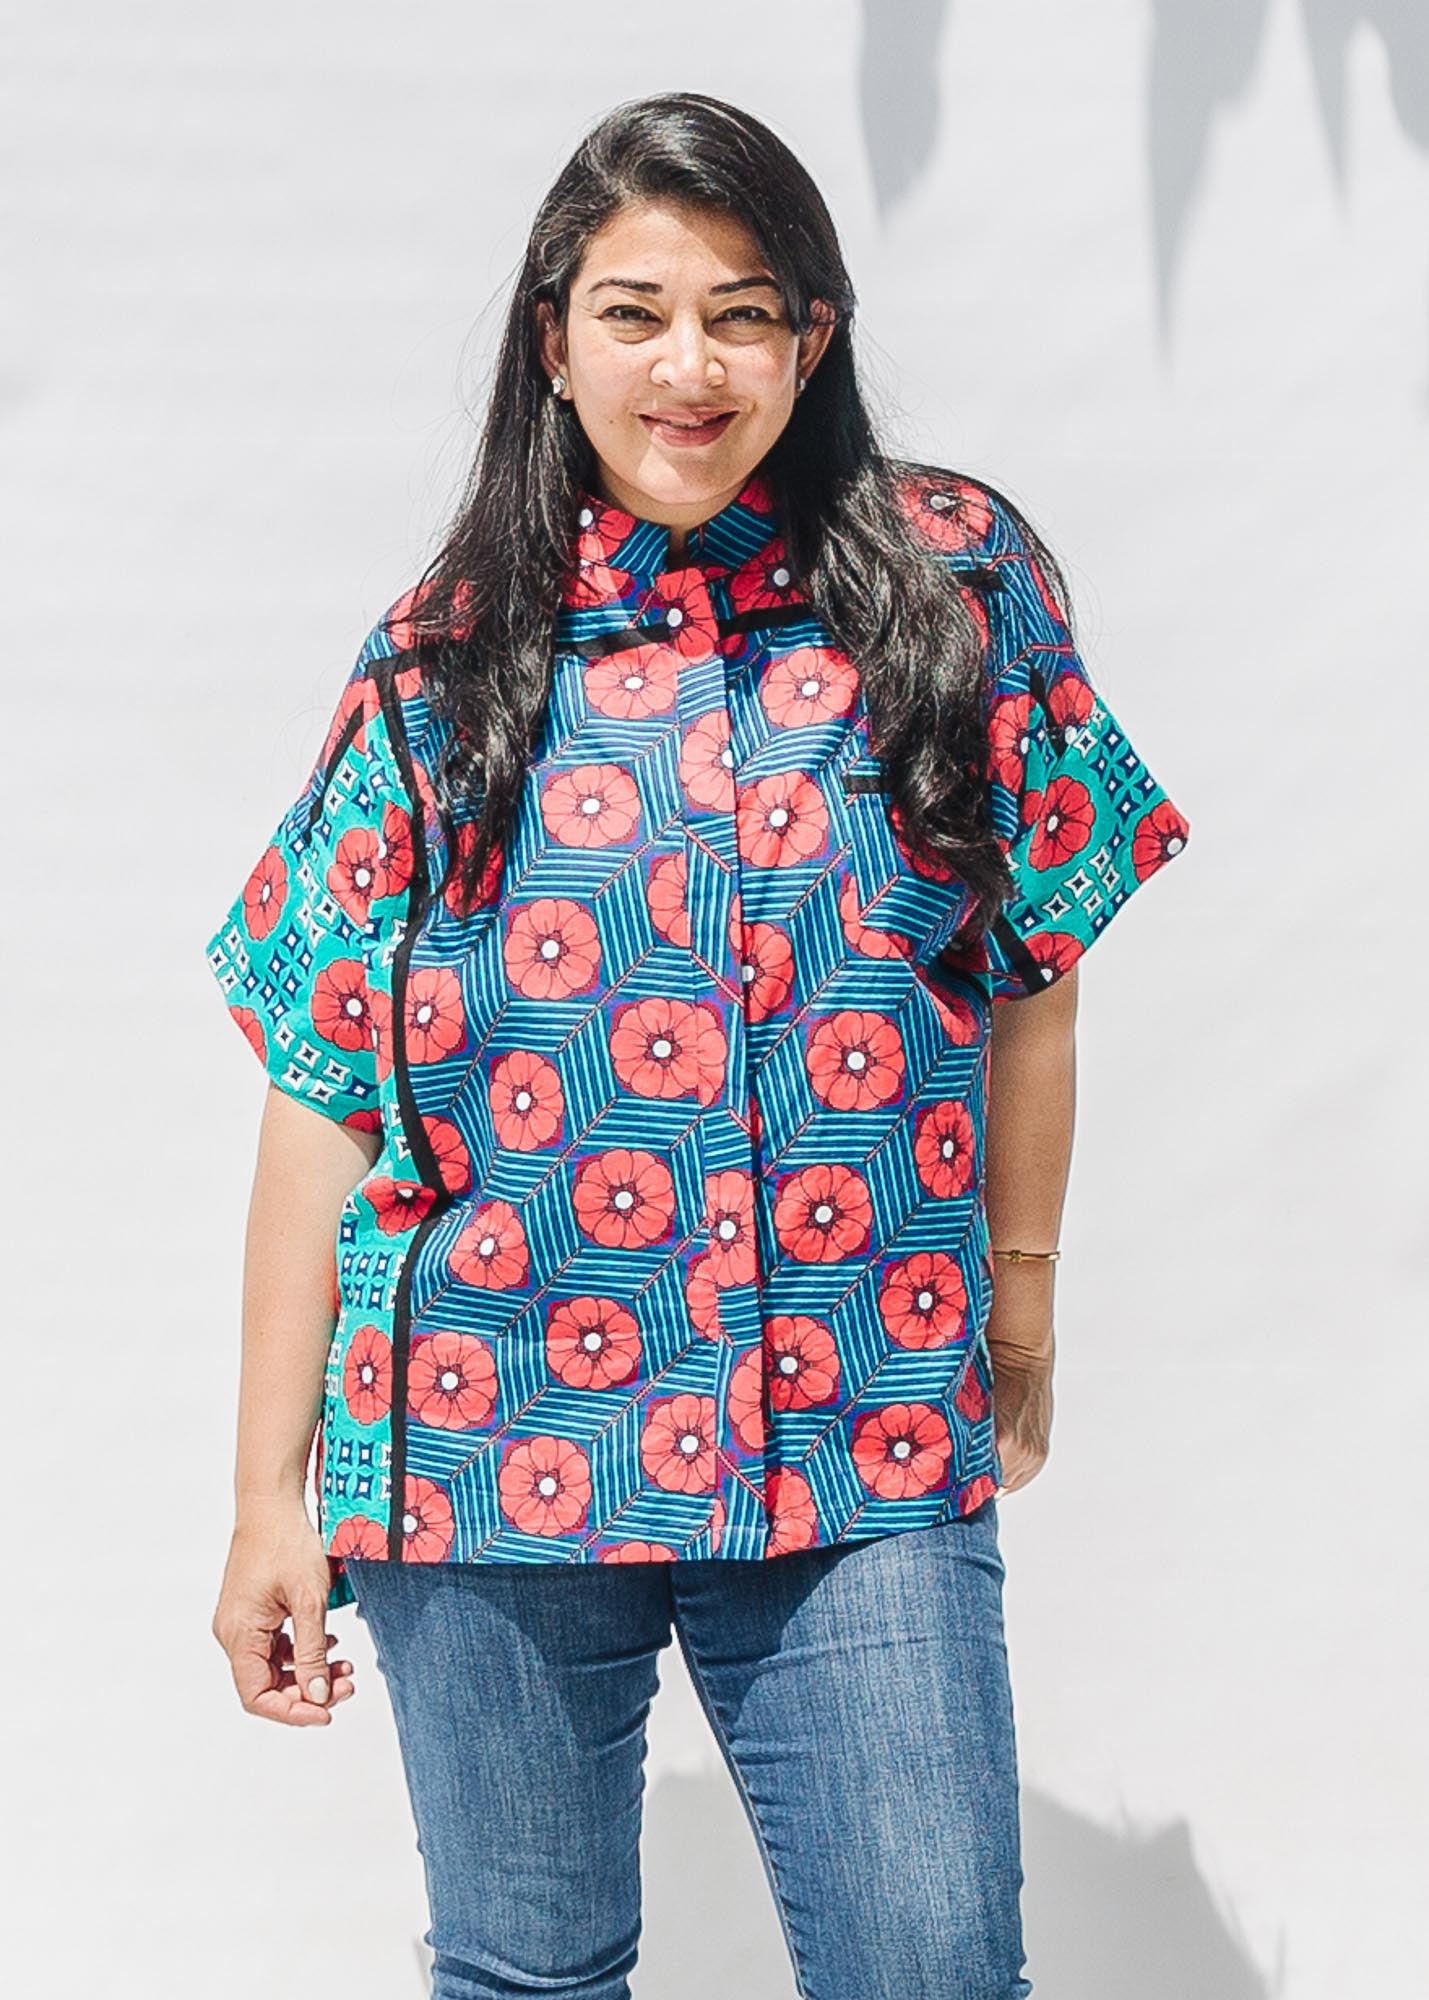 The model is wearing blue, pink, turquoise, black and white mixed pattern floral print shirt